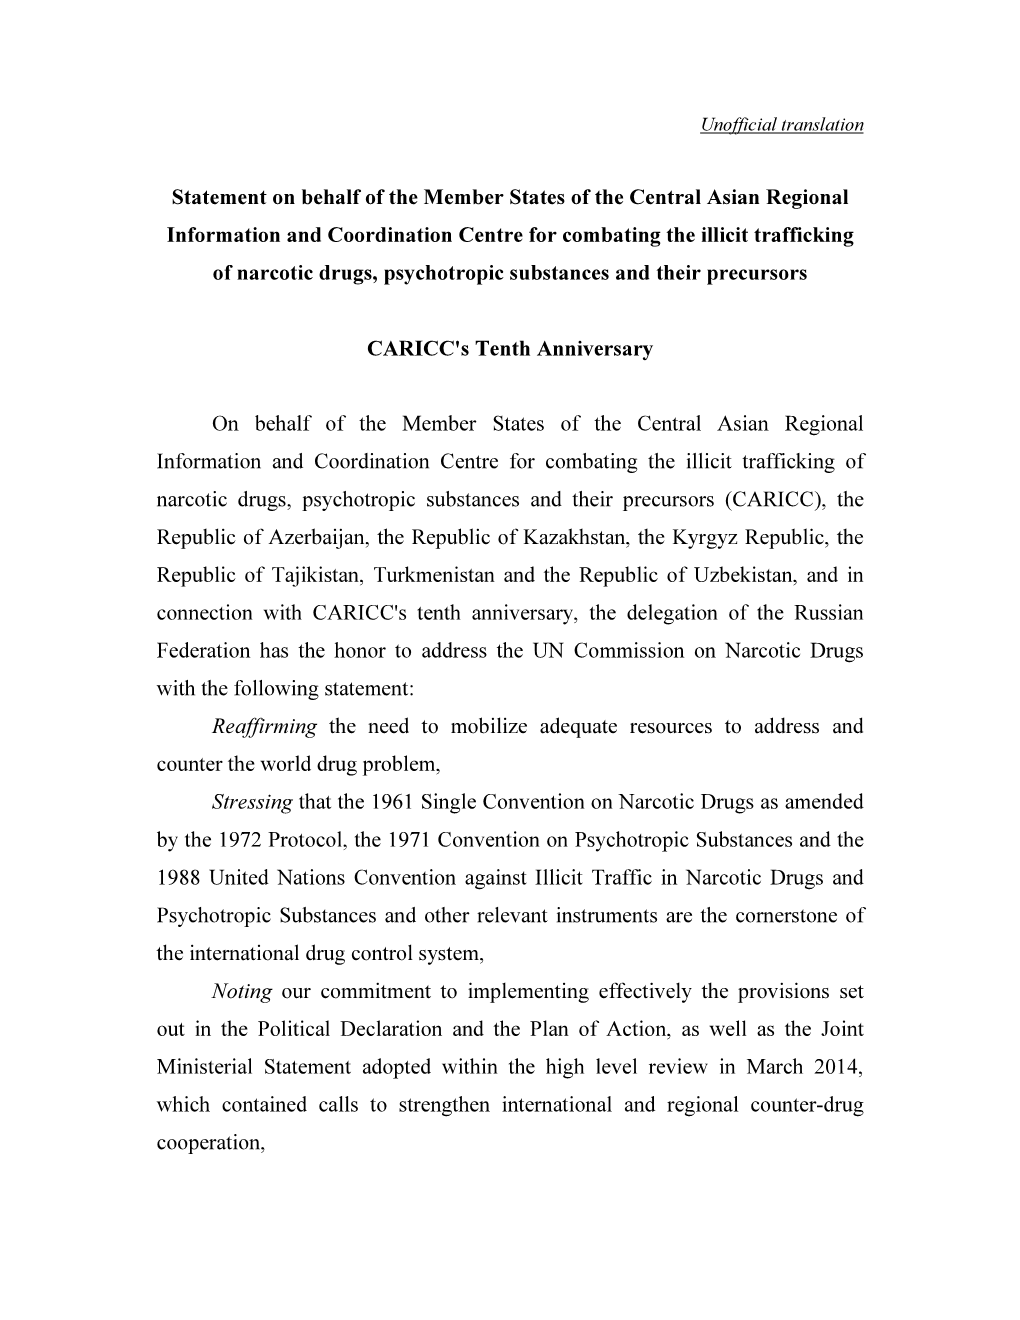 Statement on Behalf of the Member States of the Central Asian